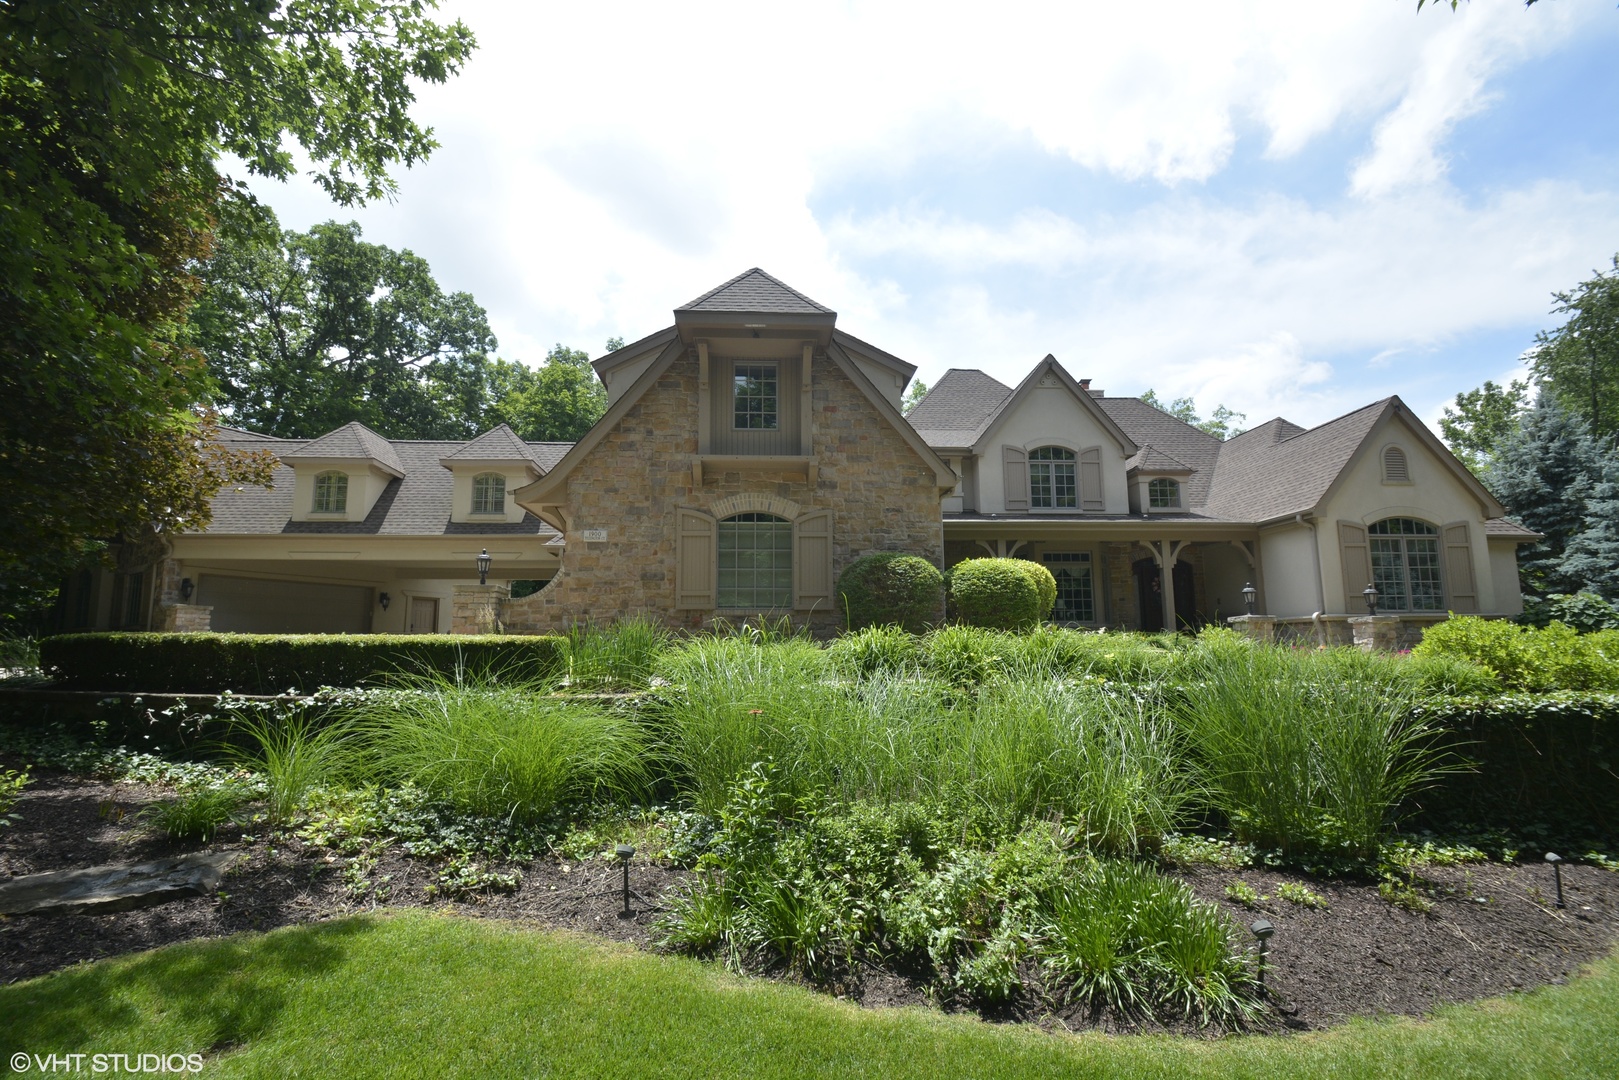 new-lenox-il-homes-for-sale-new-lenox-real-estate-bowers-realty-group